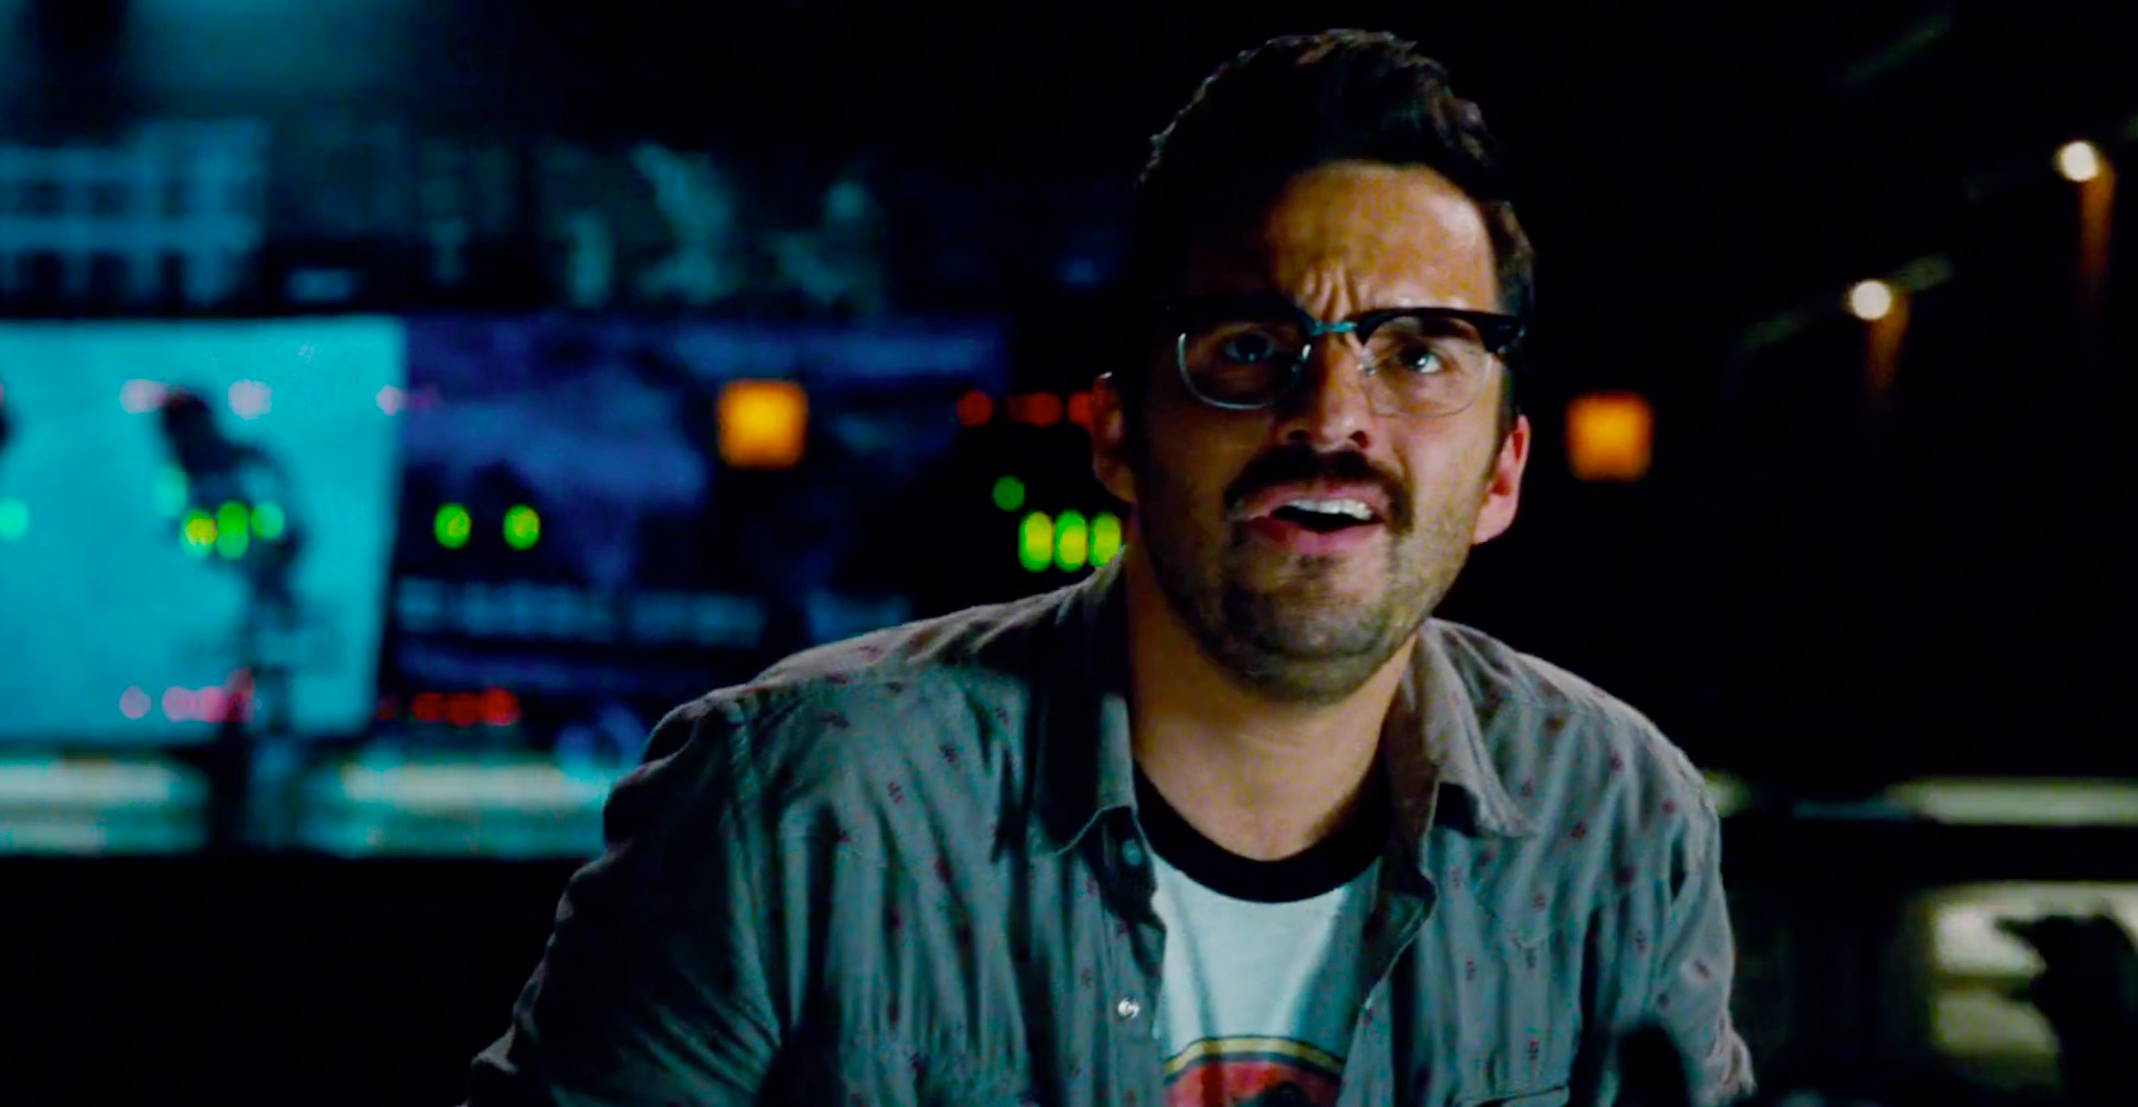 Sorry, But There Will Be No Jake Johnson in Jurassic World 2